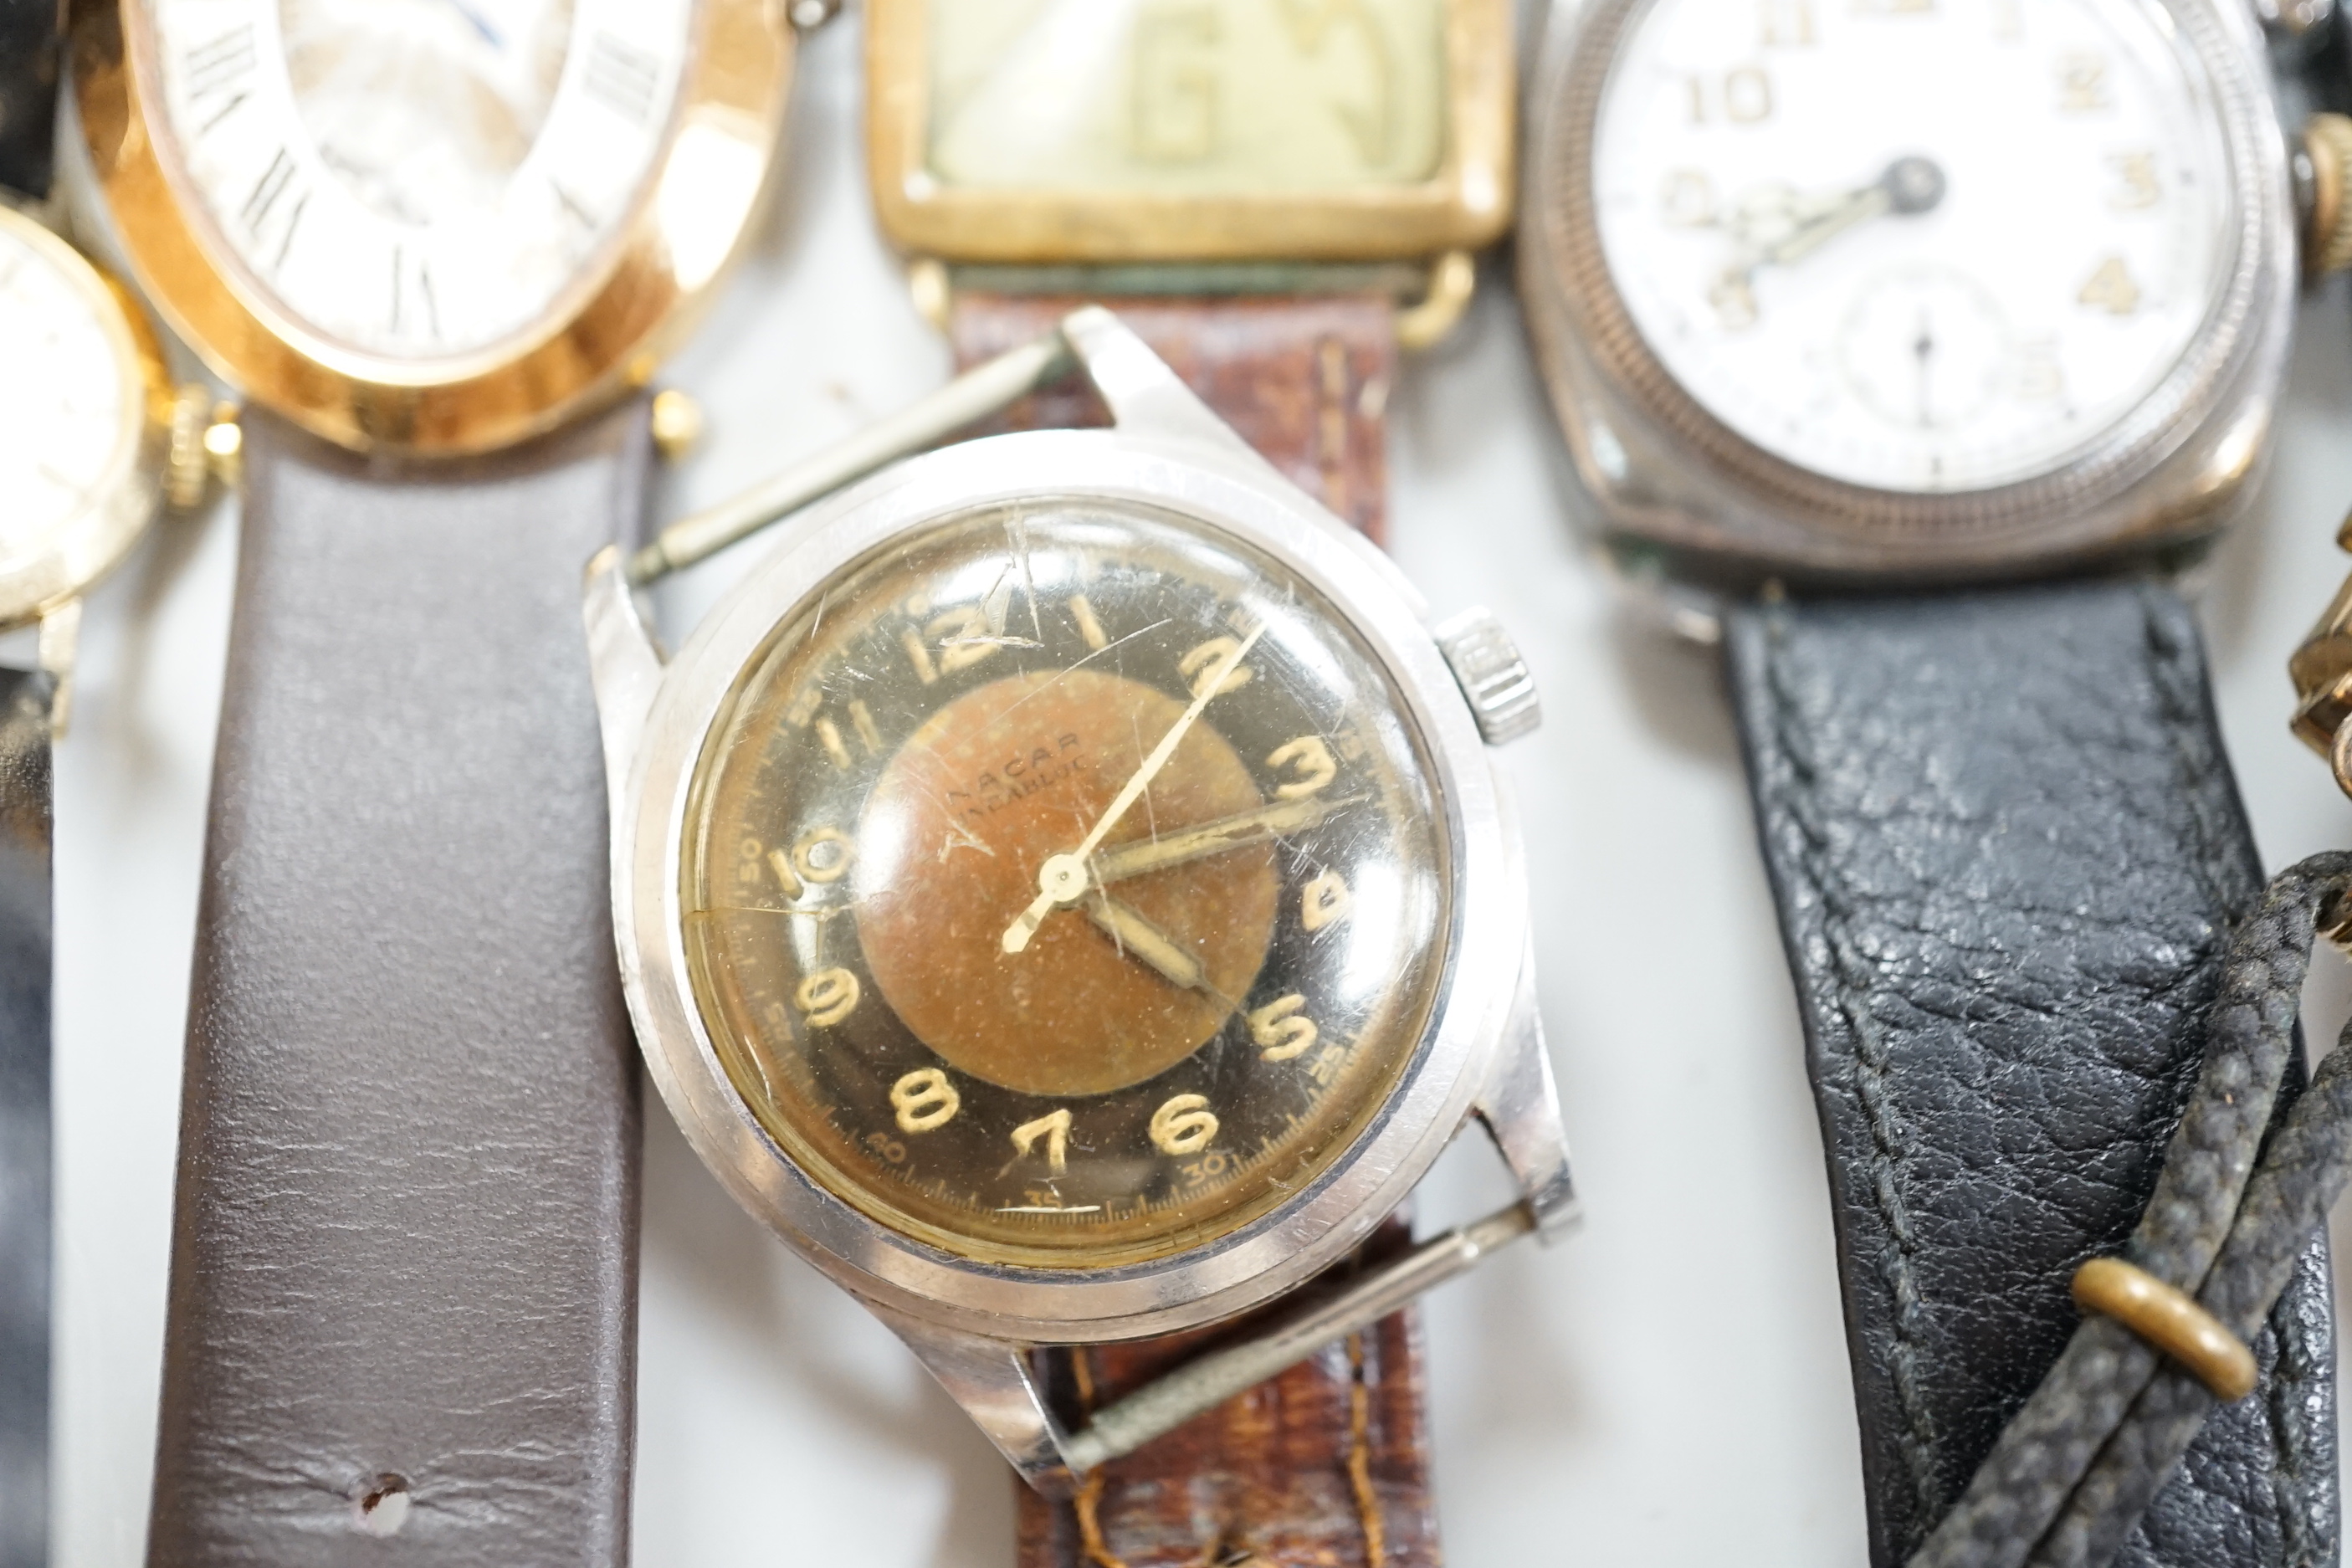 Five gentleman's assorted wrist watches including Swatch and early 20th century white metal and two lady's wrist watches.